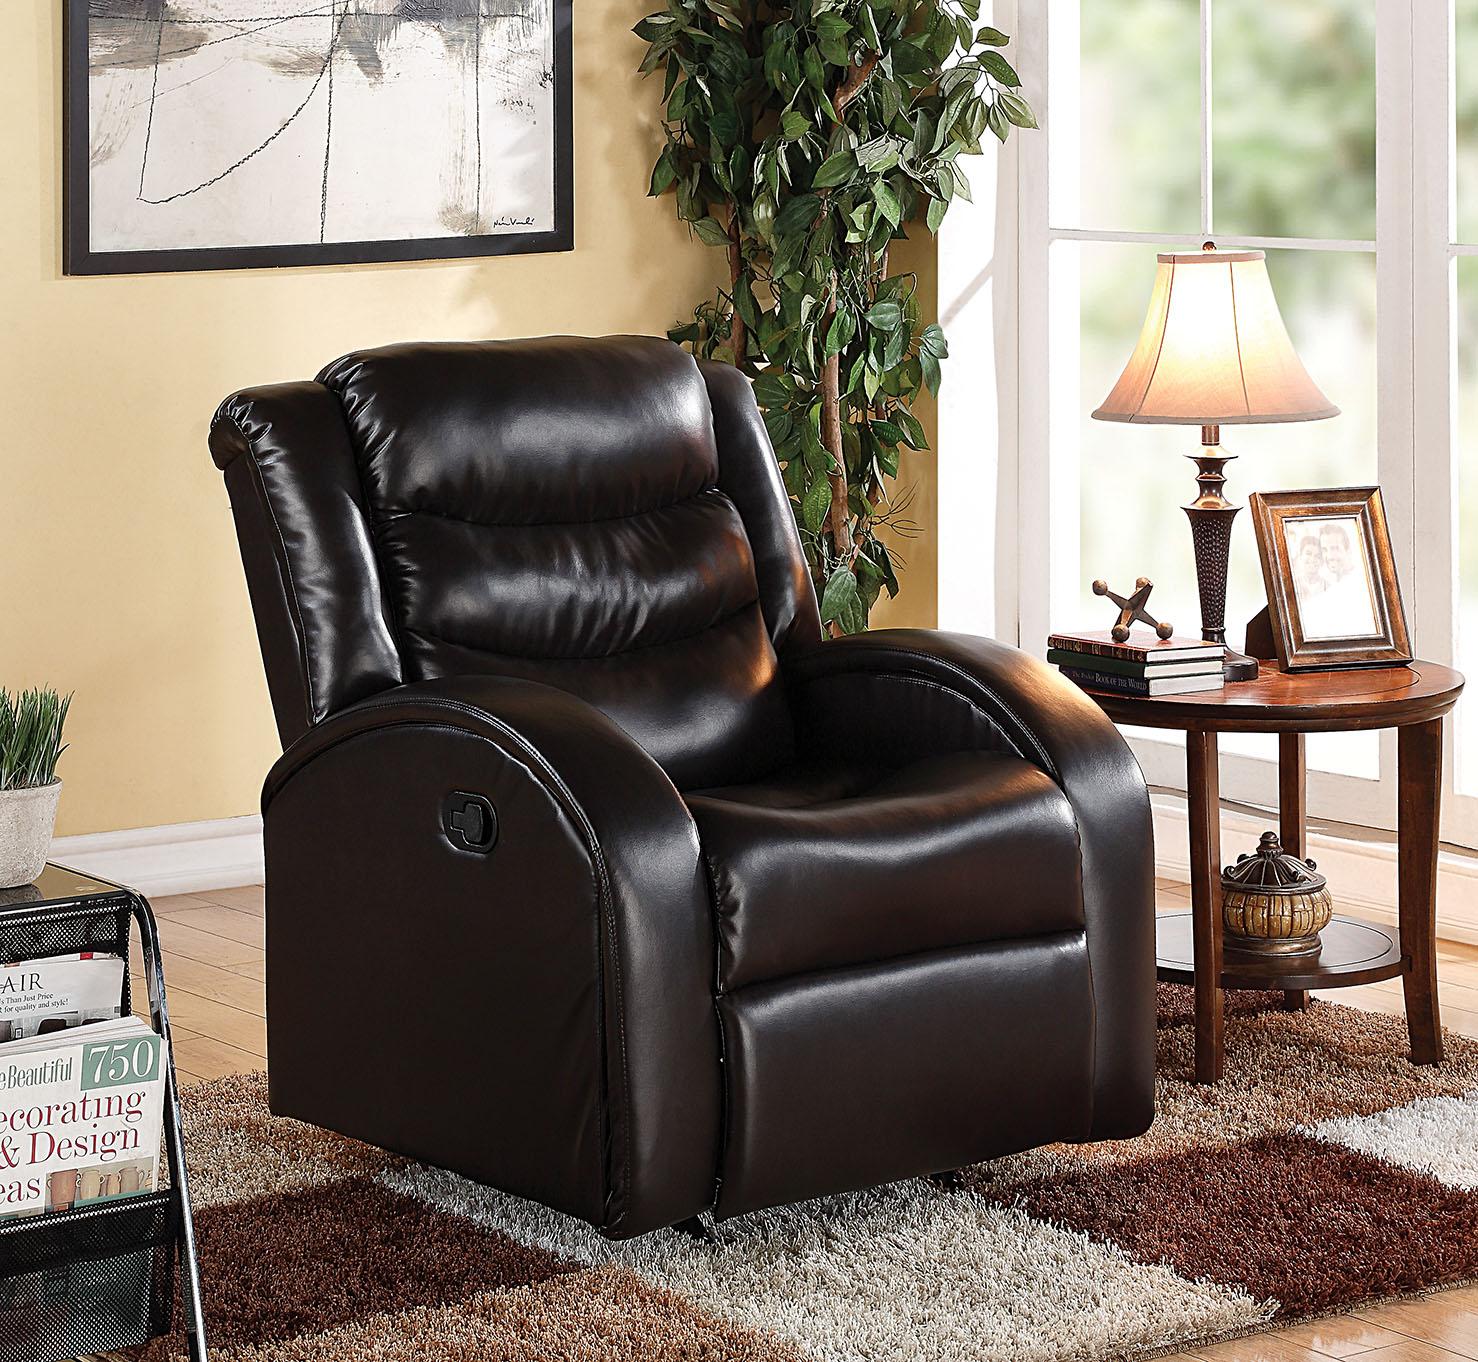 Recliner (Motion), Espresso Bonded Leather Match - Bonded Leather Match, Woo Espresso Bonded Leather Match